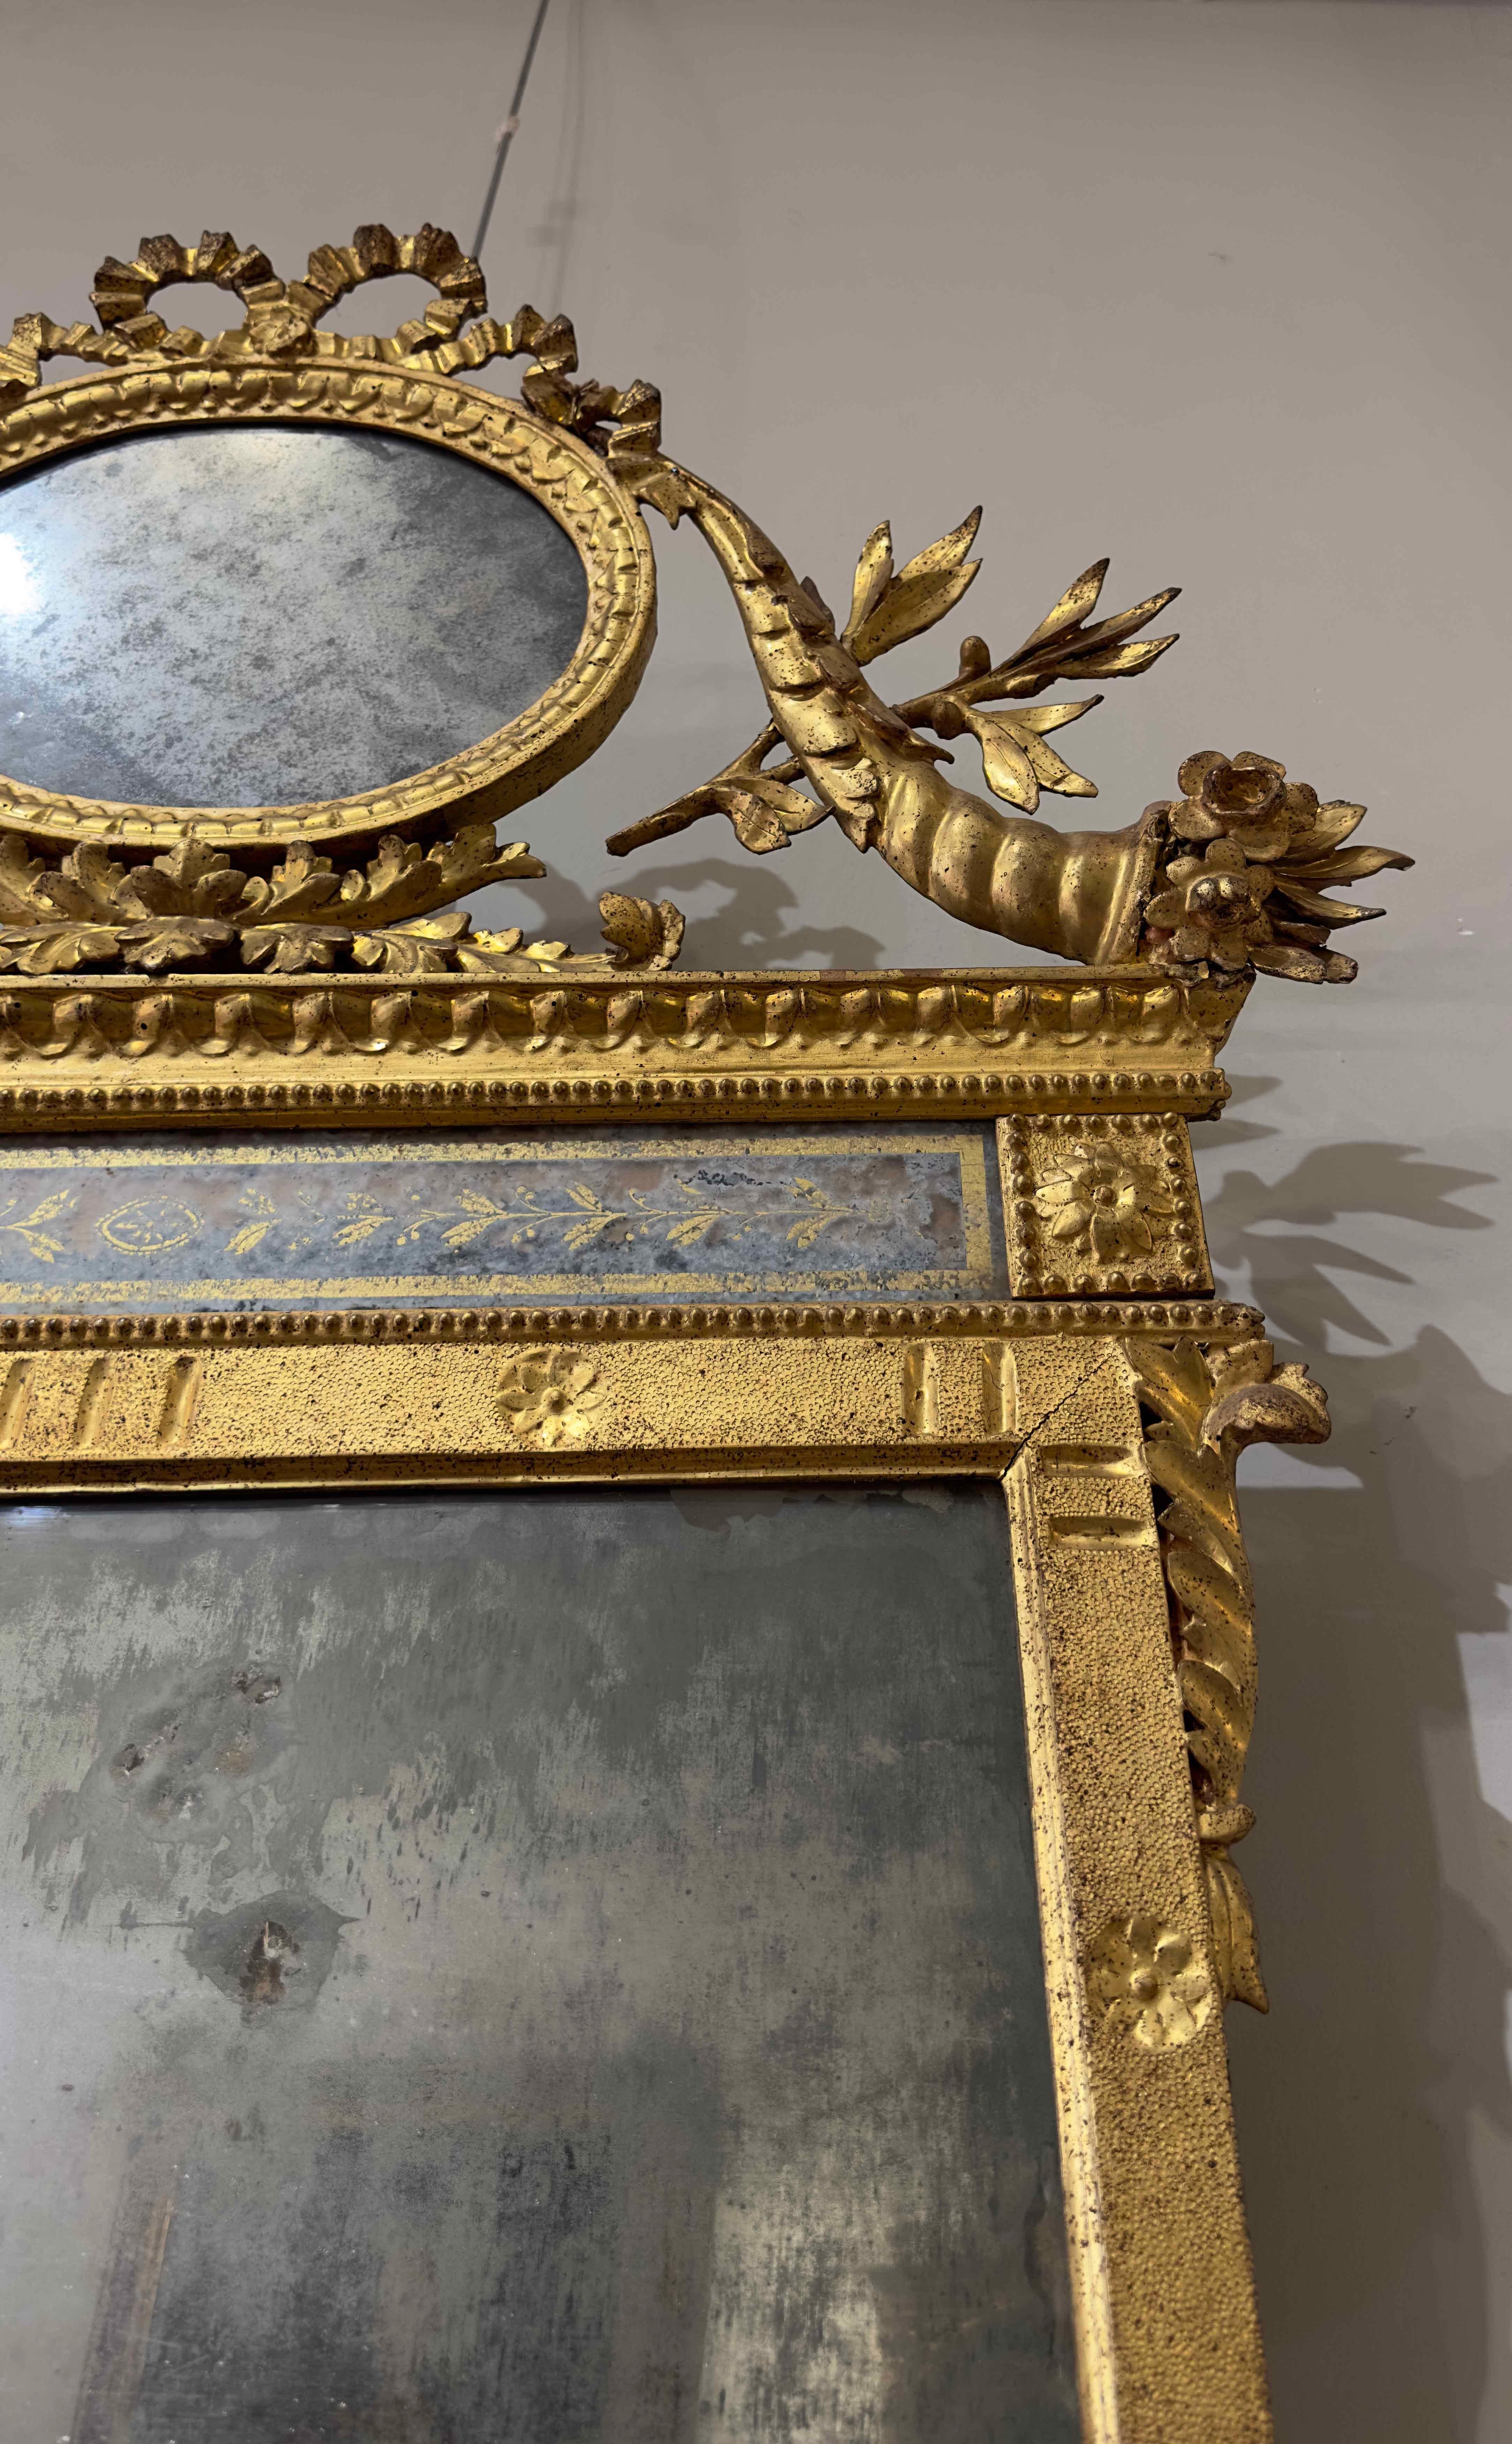 END OF THE 18th CENTURY NEOCLASSICAL MIRROR WITH CORNUCOPIAS AND OLIVE BRANCHES  In Good Condition For Sale In Firenze, FI